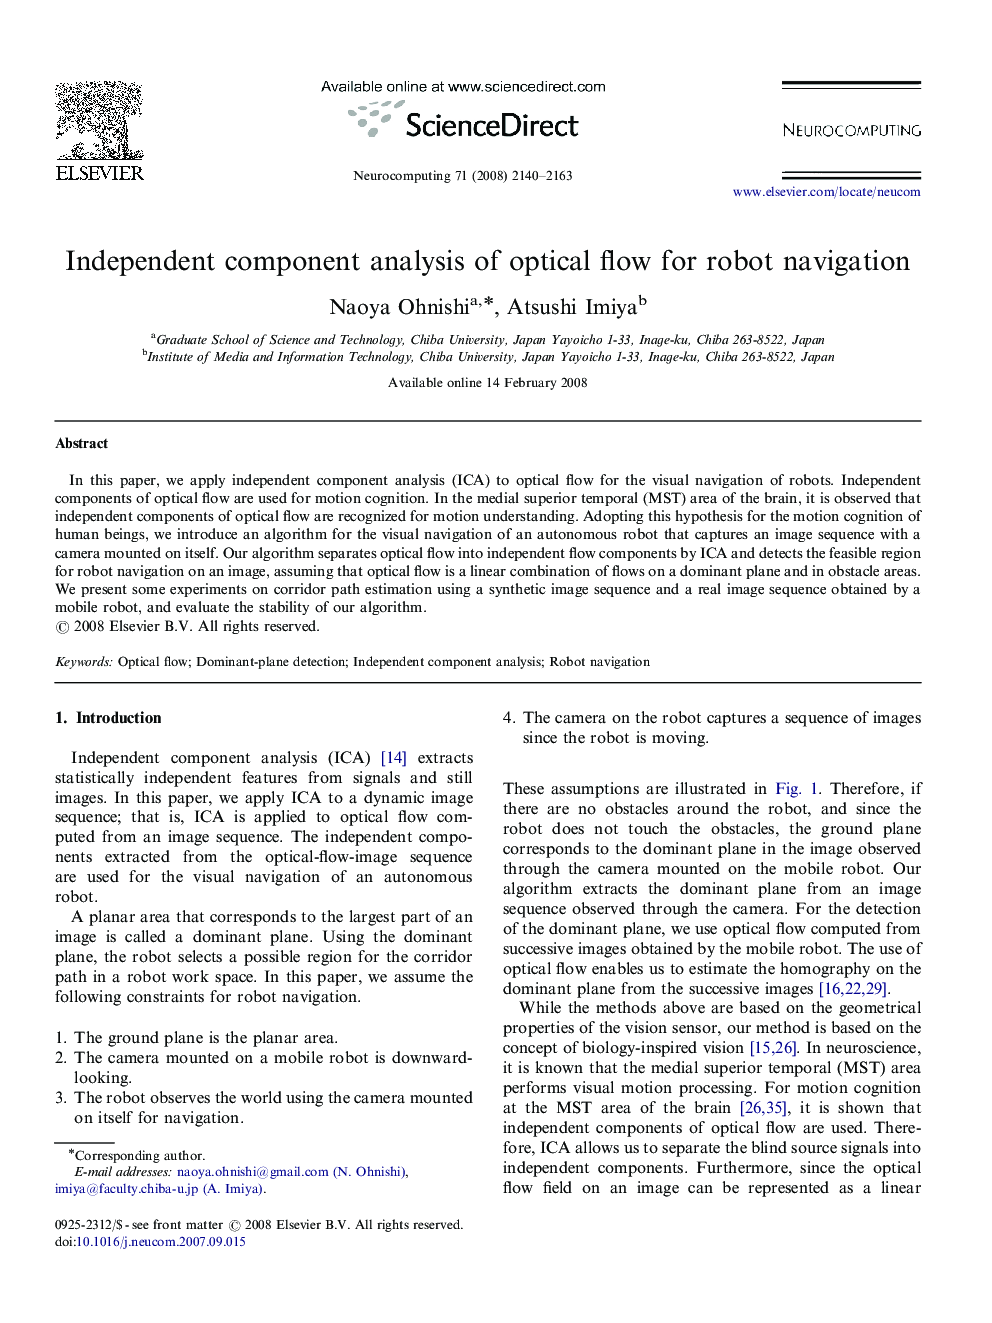 Independent component analysis of optical flow for robot navigation